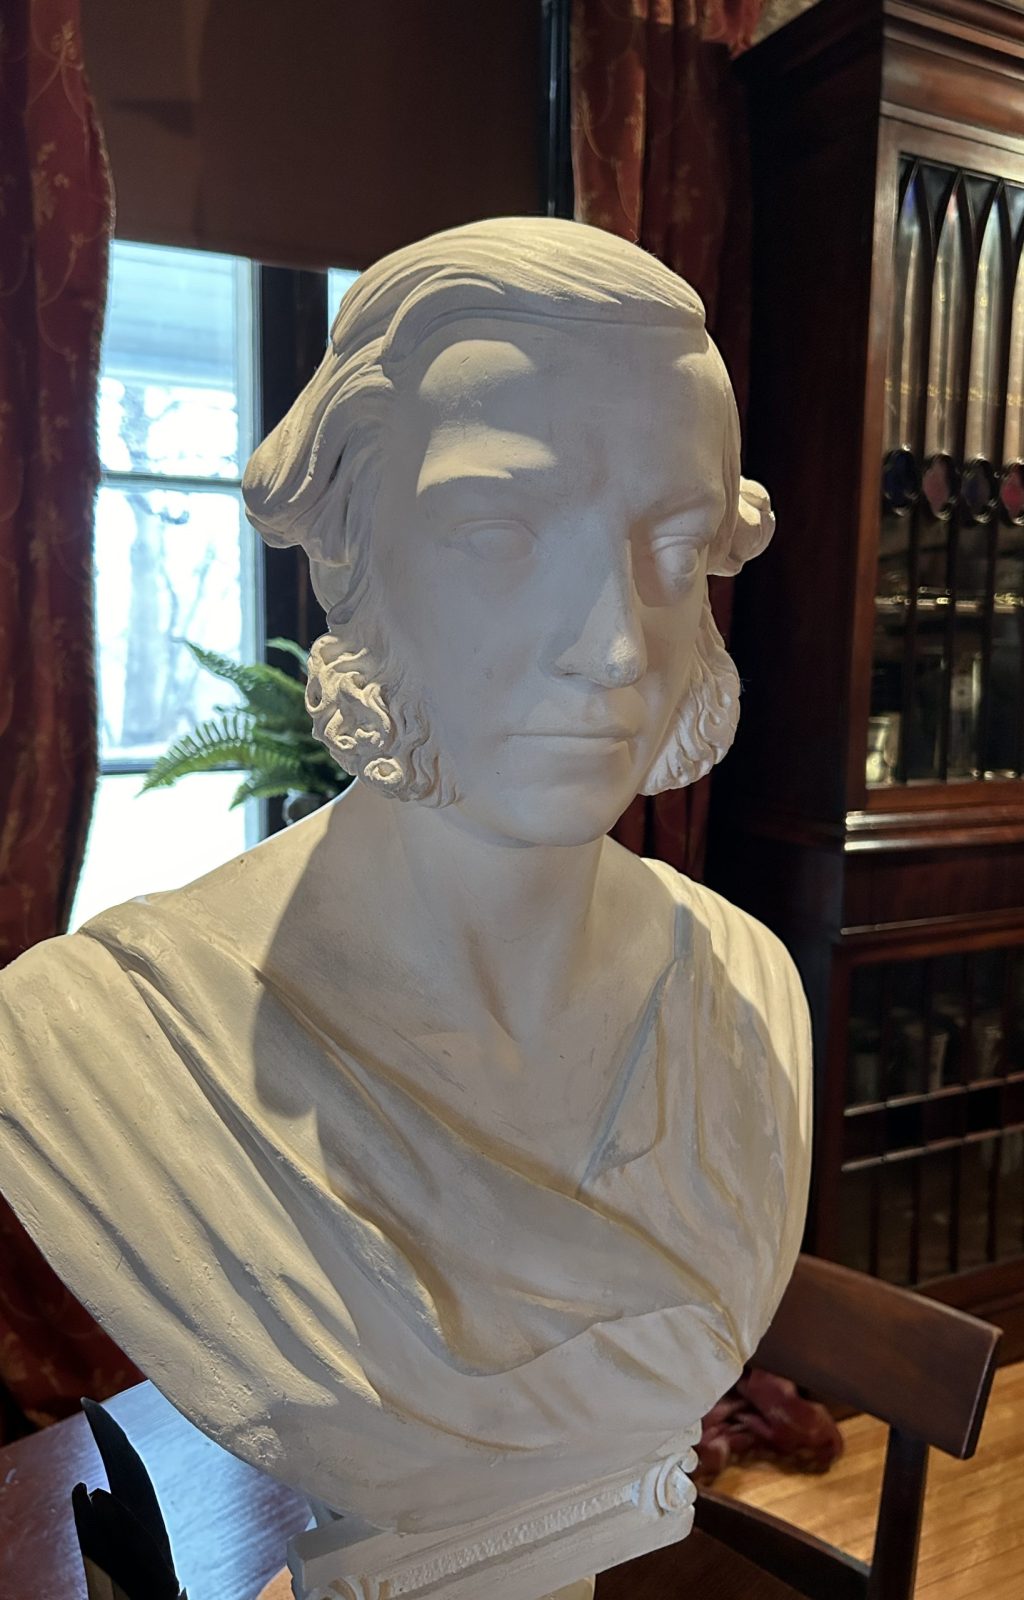 An image of a plaster bust of a man. The man has large sideburns and a toga draped over the shoulders.